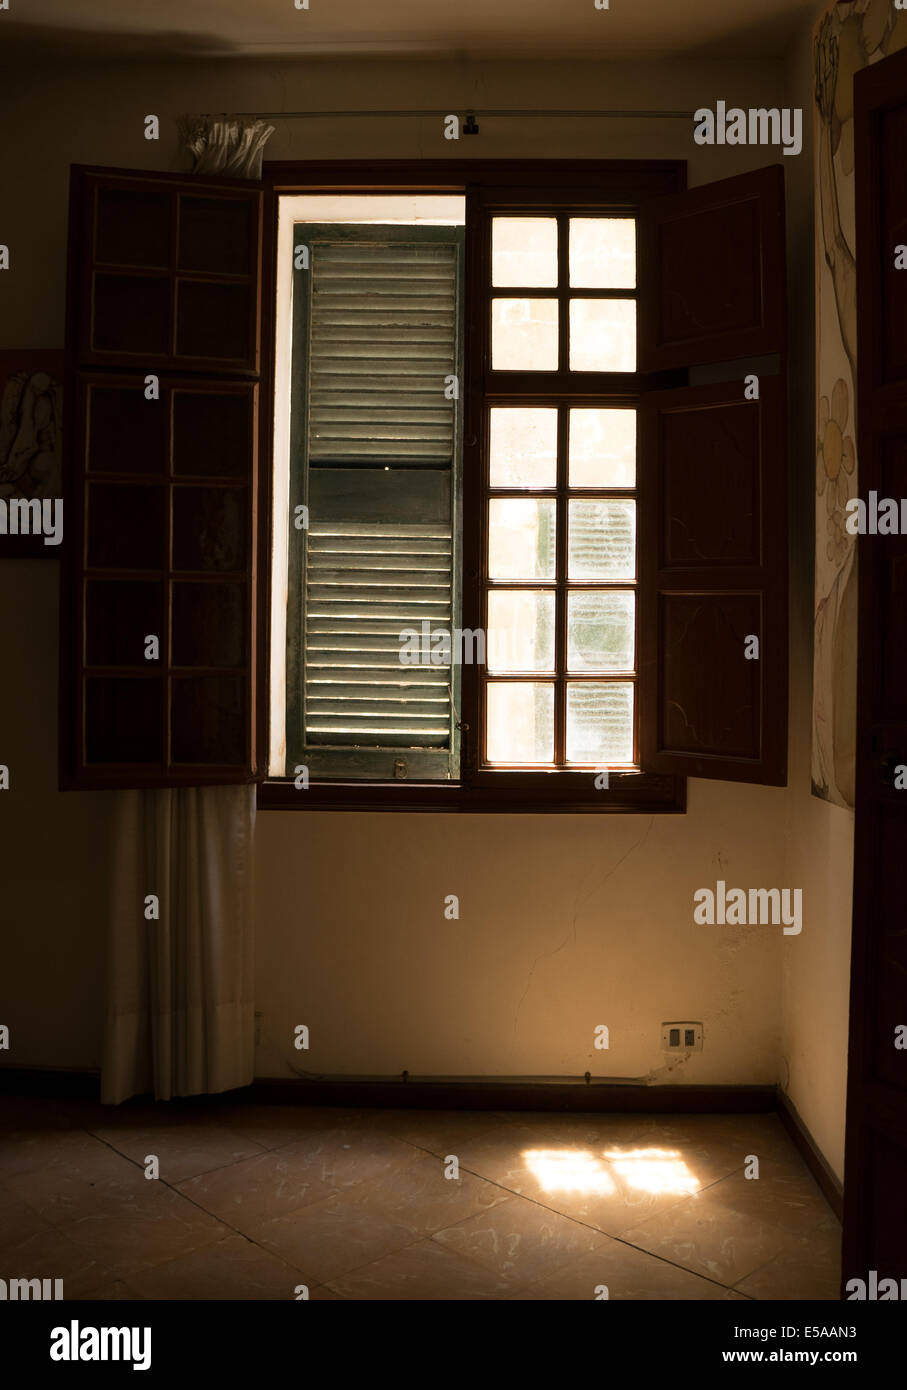 View from an interior (room) of a shuttered window, internal shutters open, one external shutter closed, pool of light on floor. Stock Photo